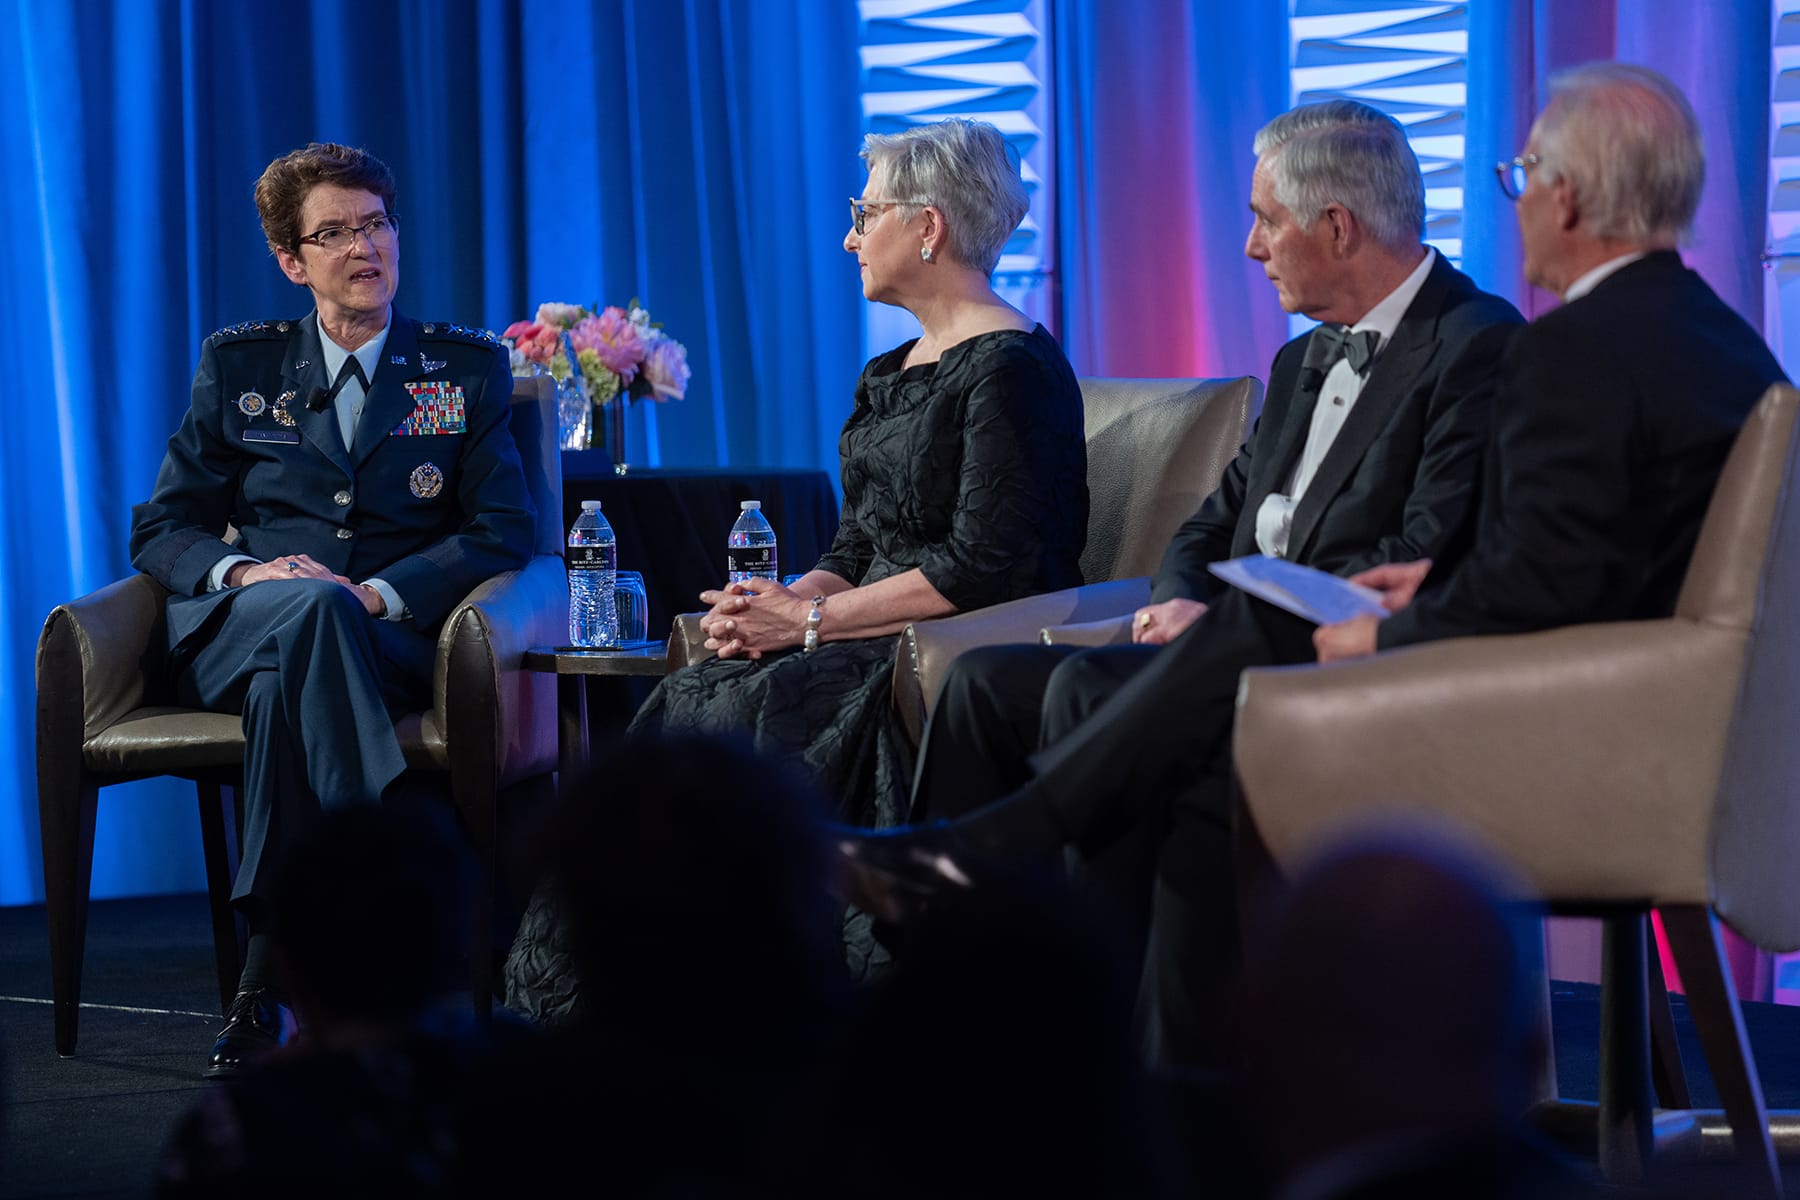 Fireside chat with honorees at the 2022 Eisenhower Awards Gala